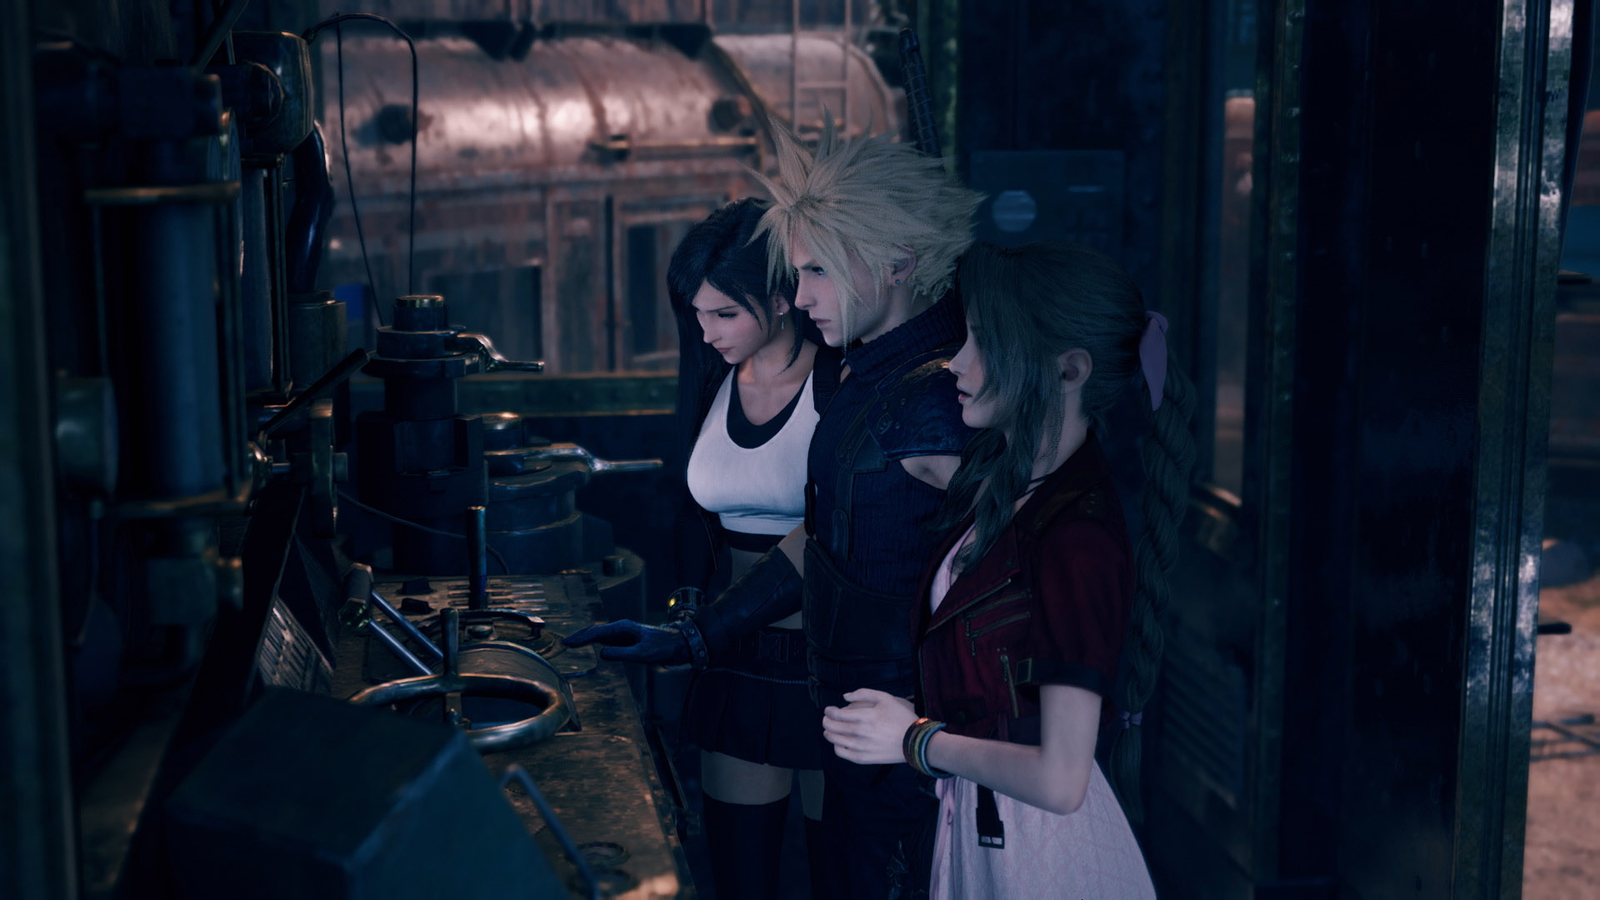 Final Fantasy 7 Rebirth's producer tells fans the game is still on